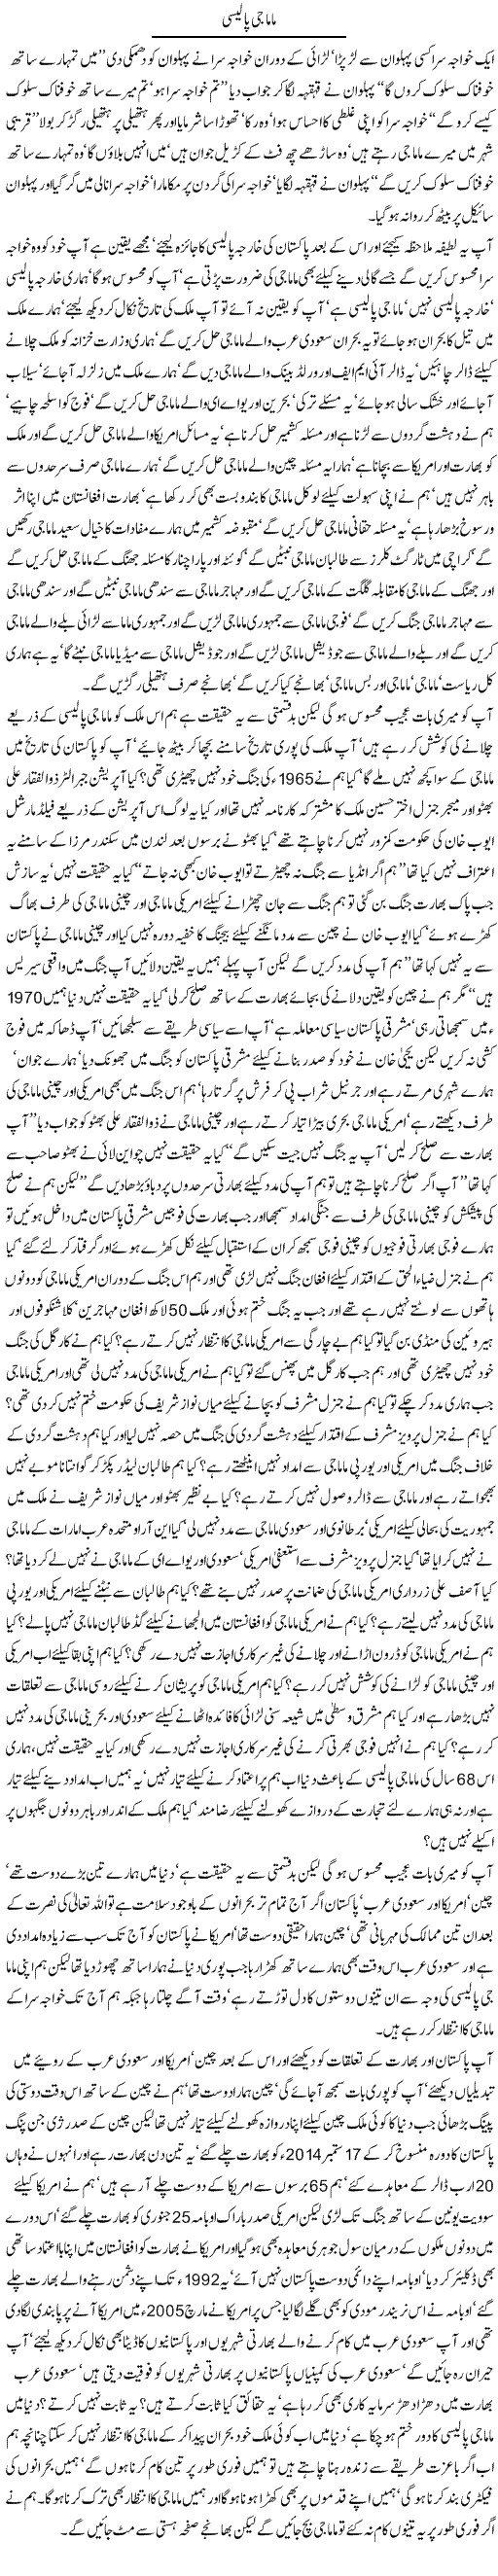 Mama G Policy by Javed Chaudhry